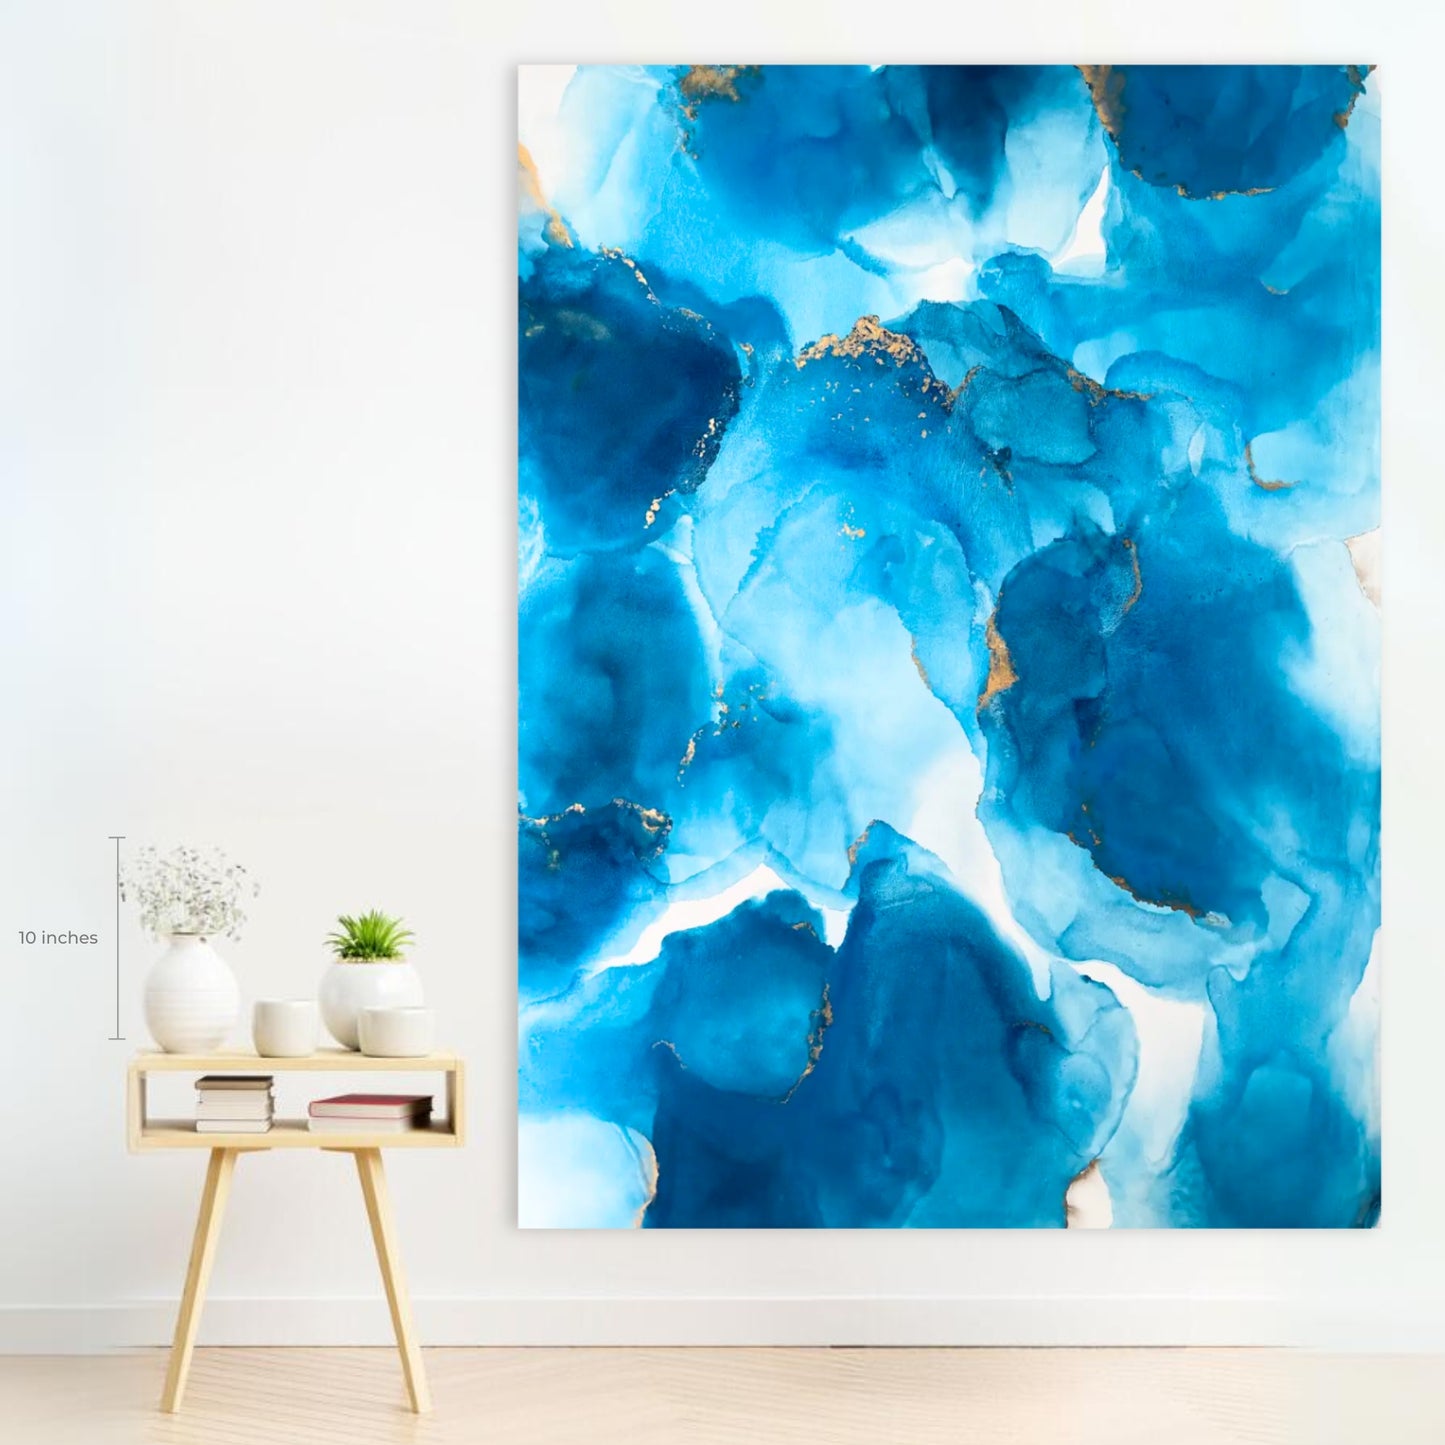 Blue Abstract Painting